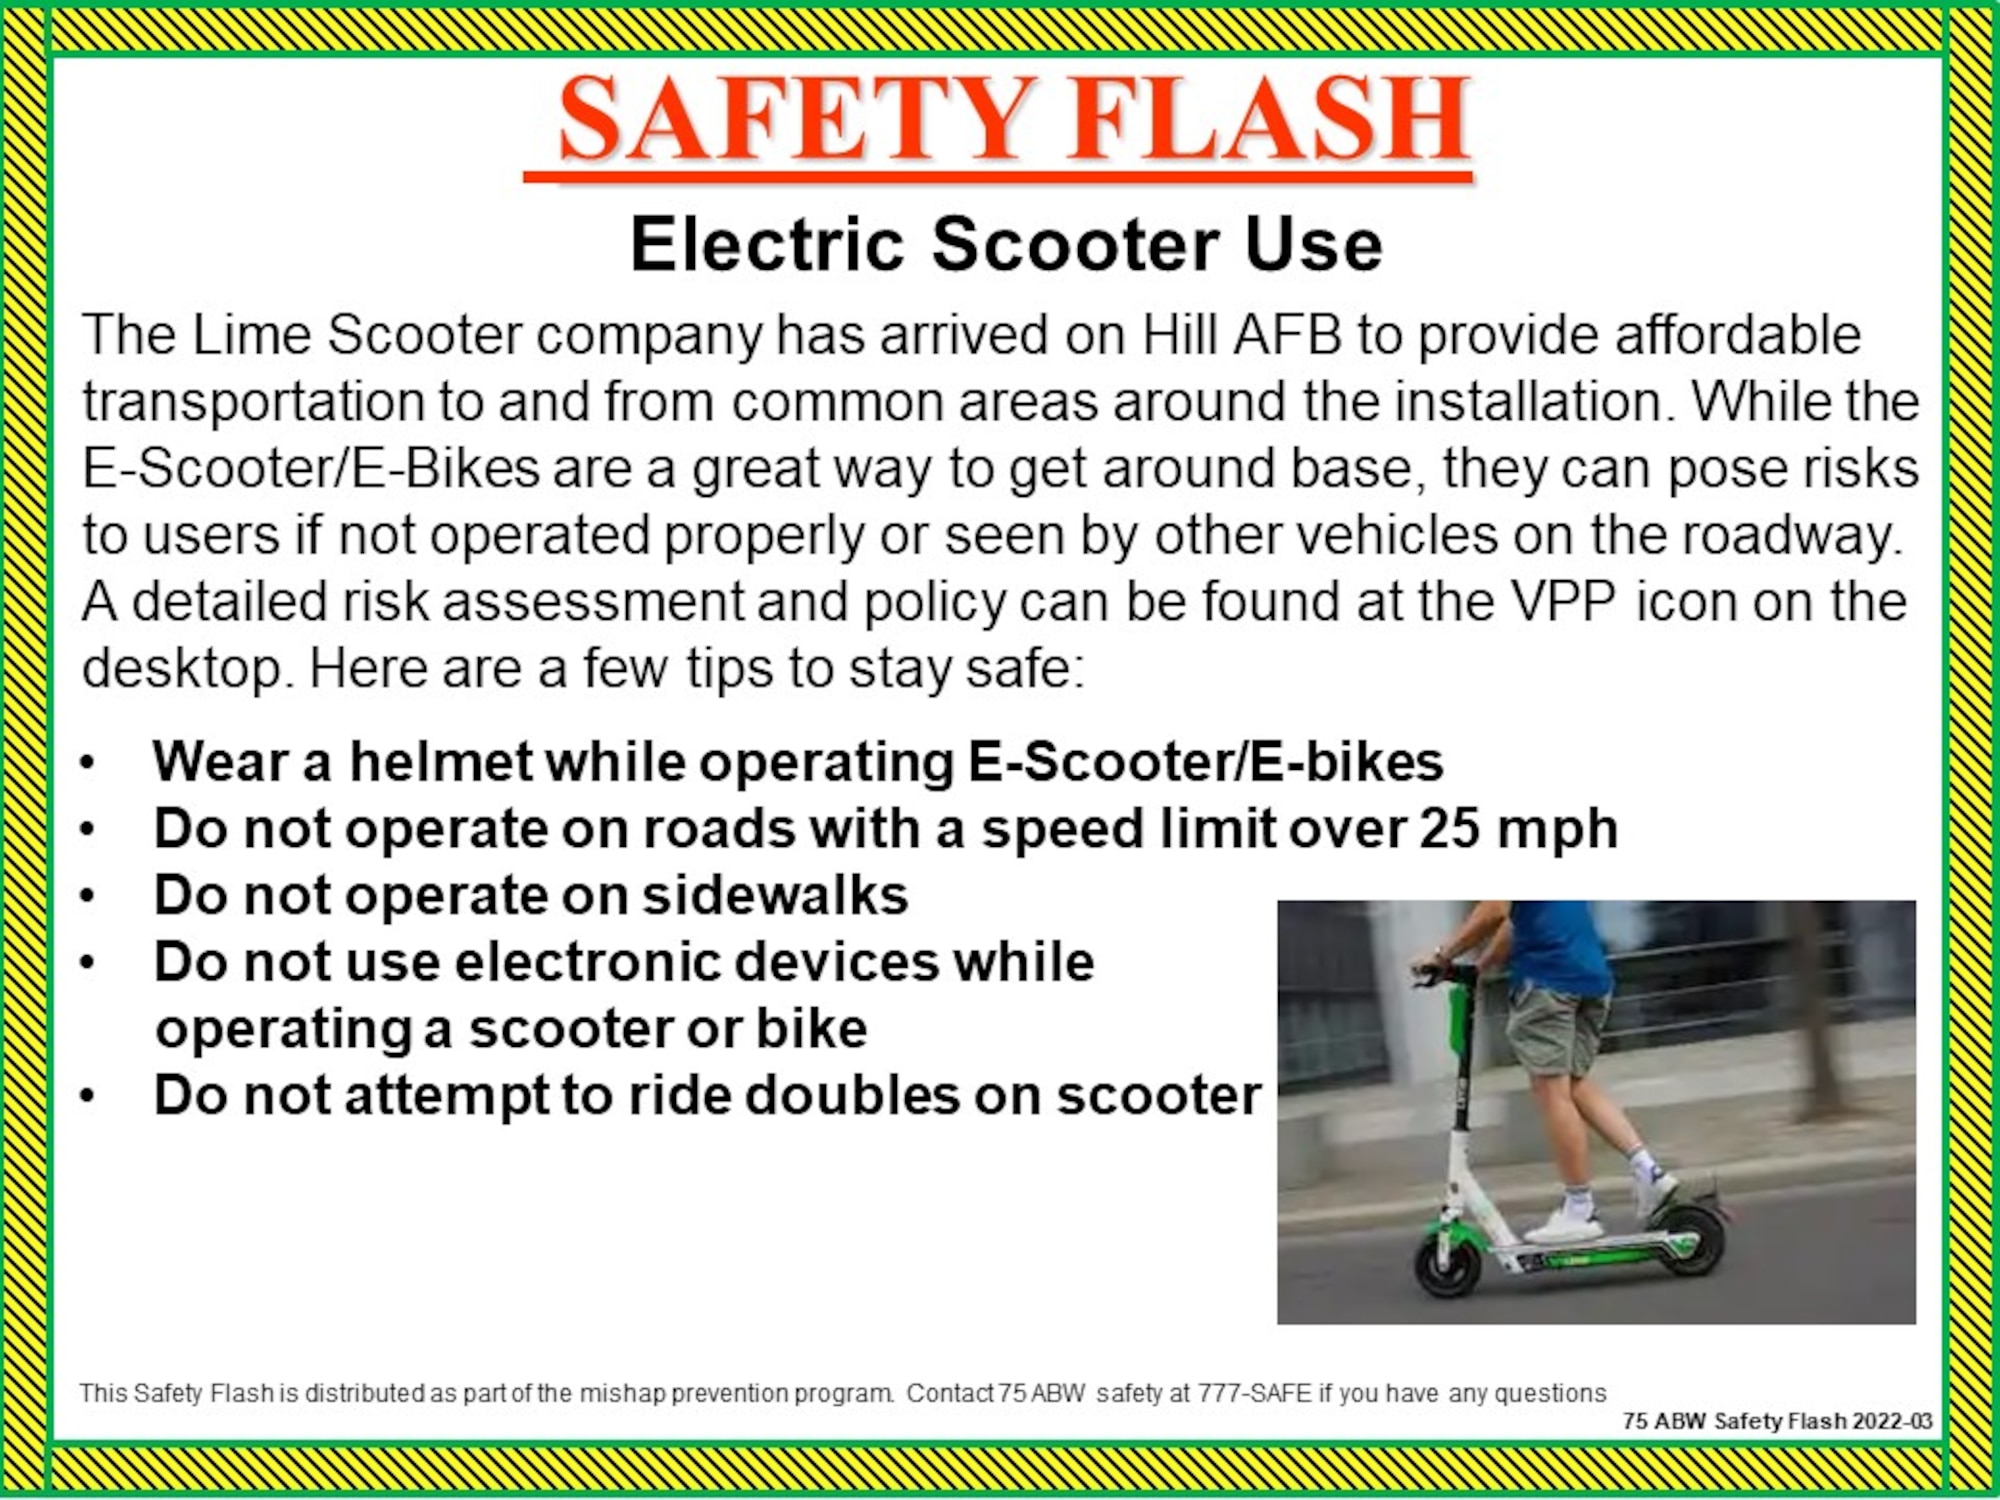 Safety concerns arise as electric scooters and bikes popular on